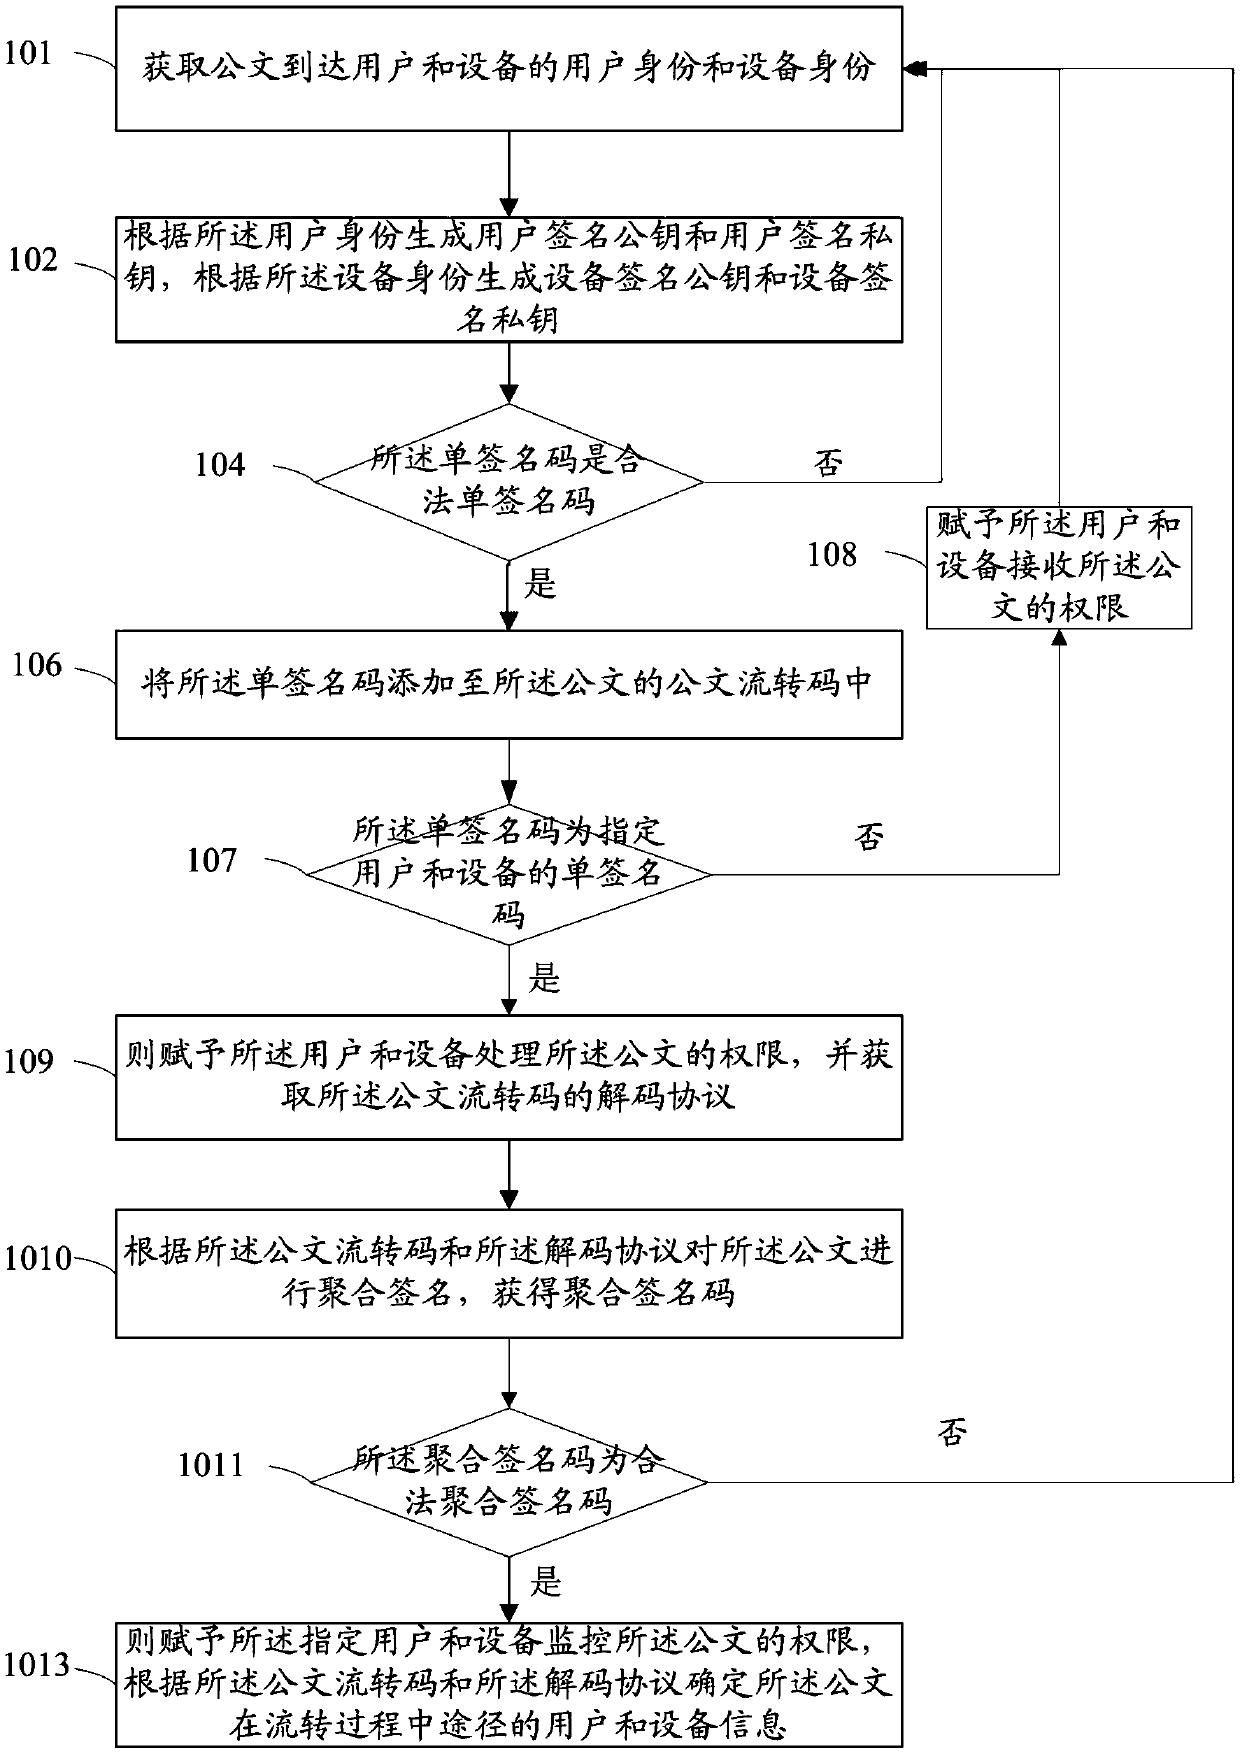 Document circulation monitoring method and system